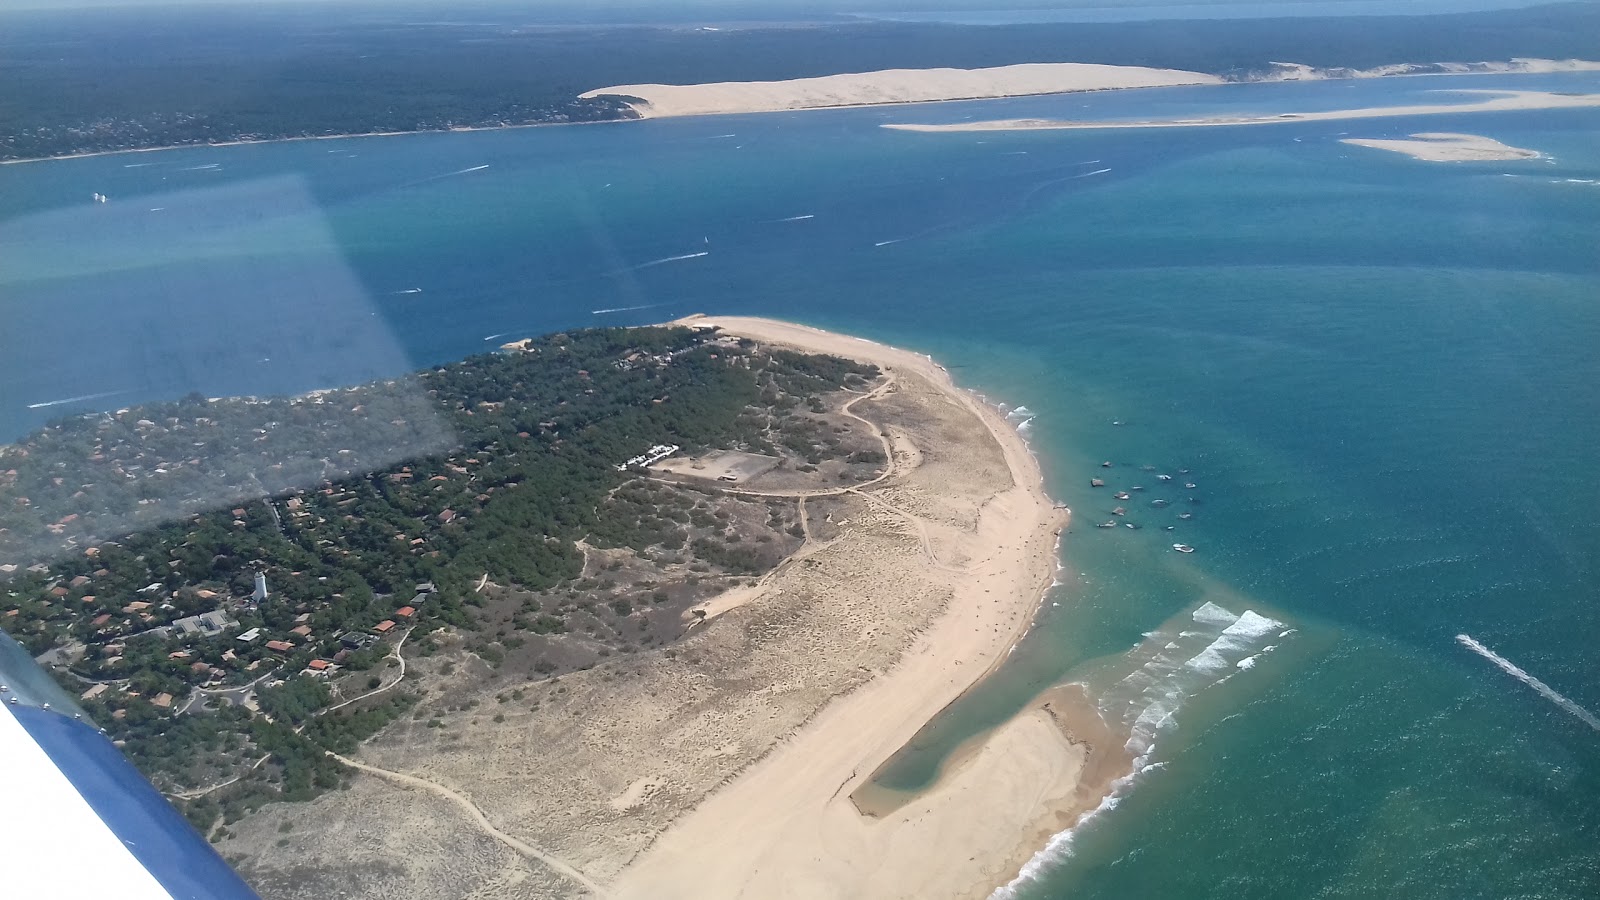 Photo of Pointe du Cap Ferret with long straight shore